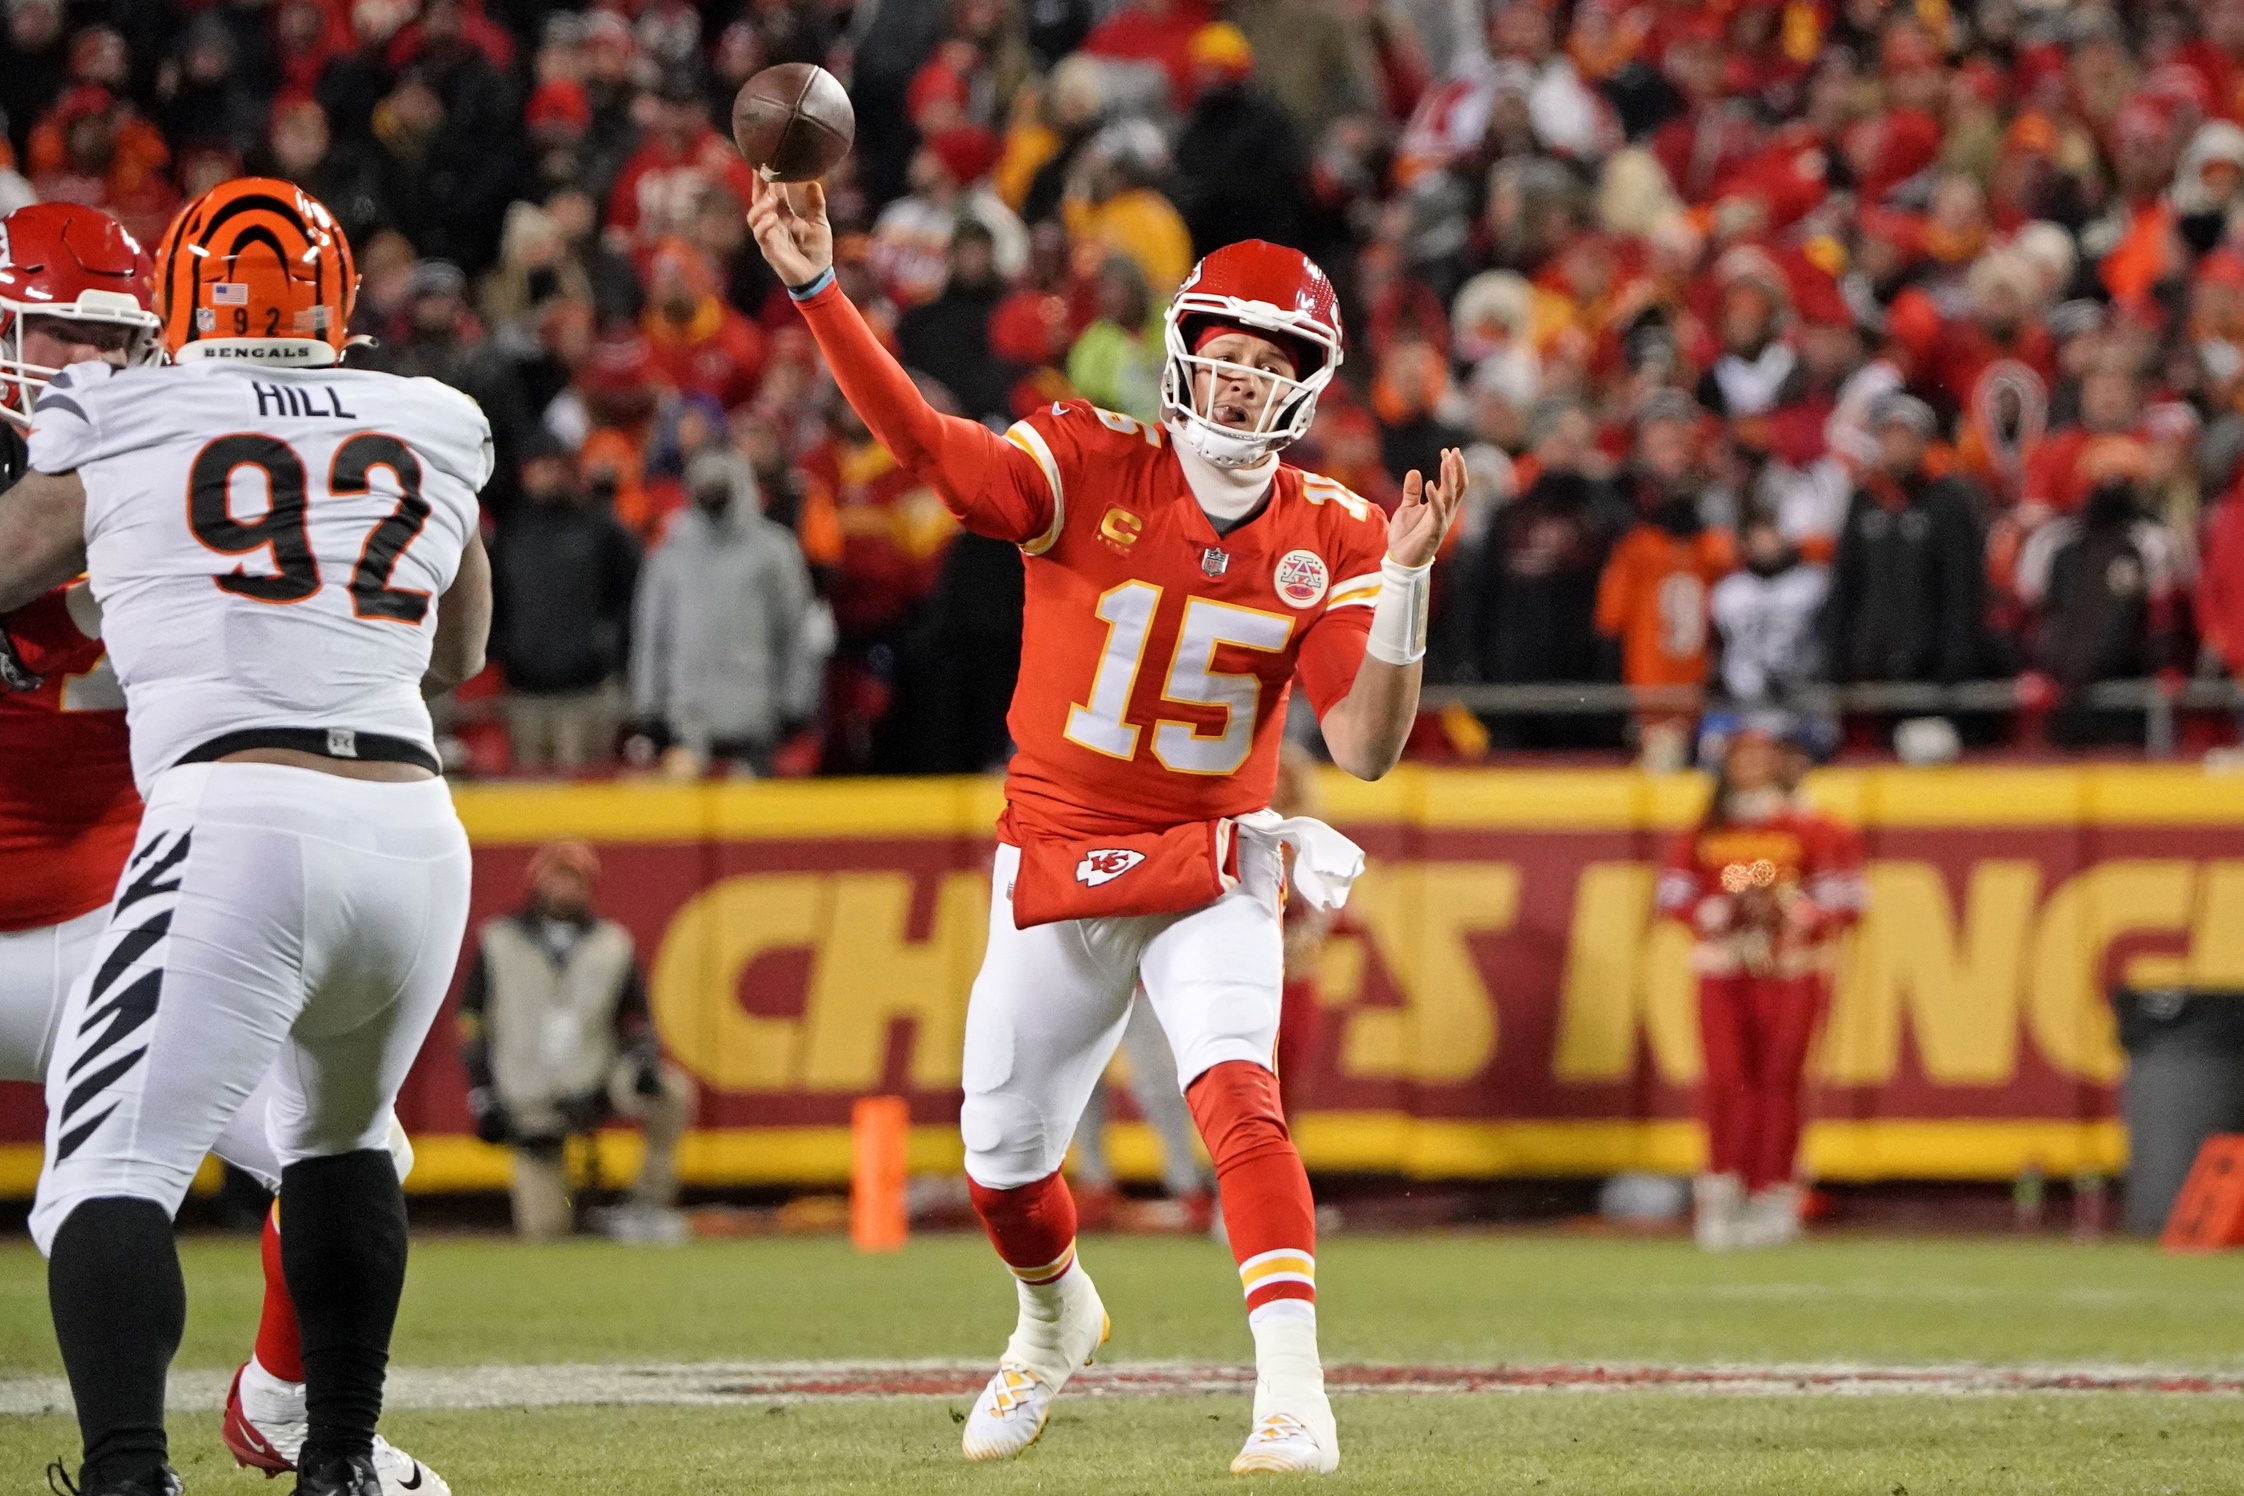 bengals vs chiefs results